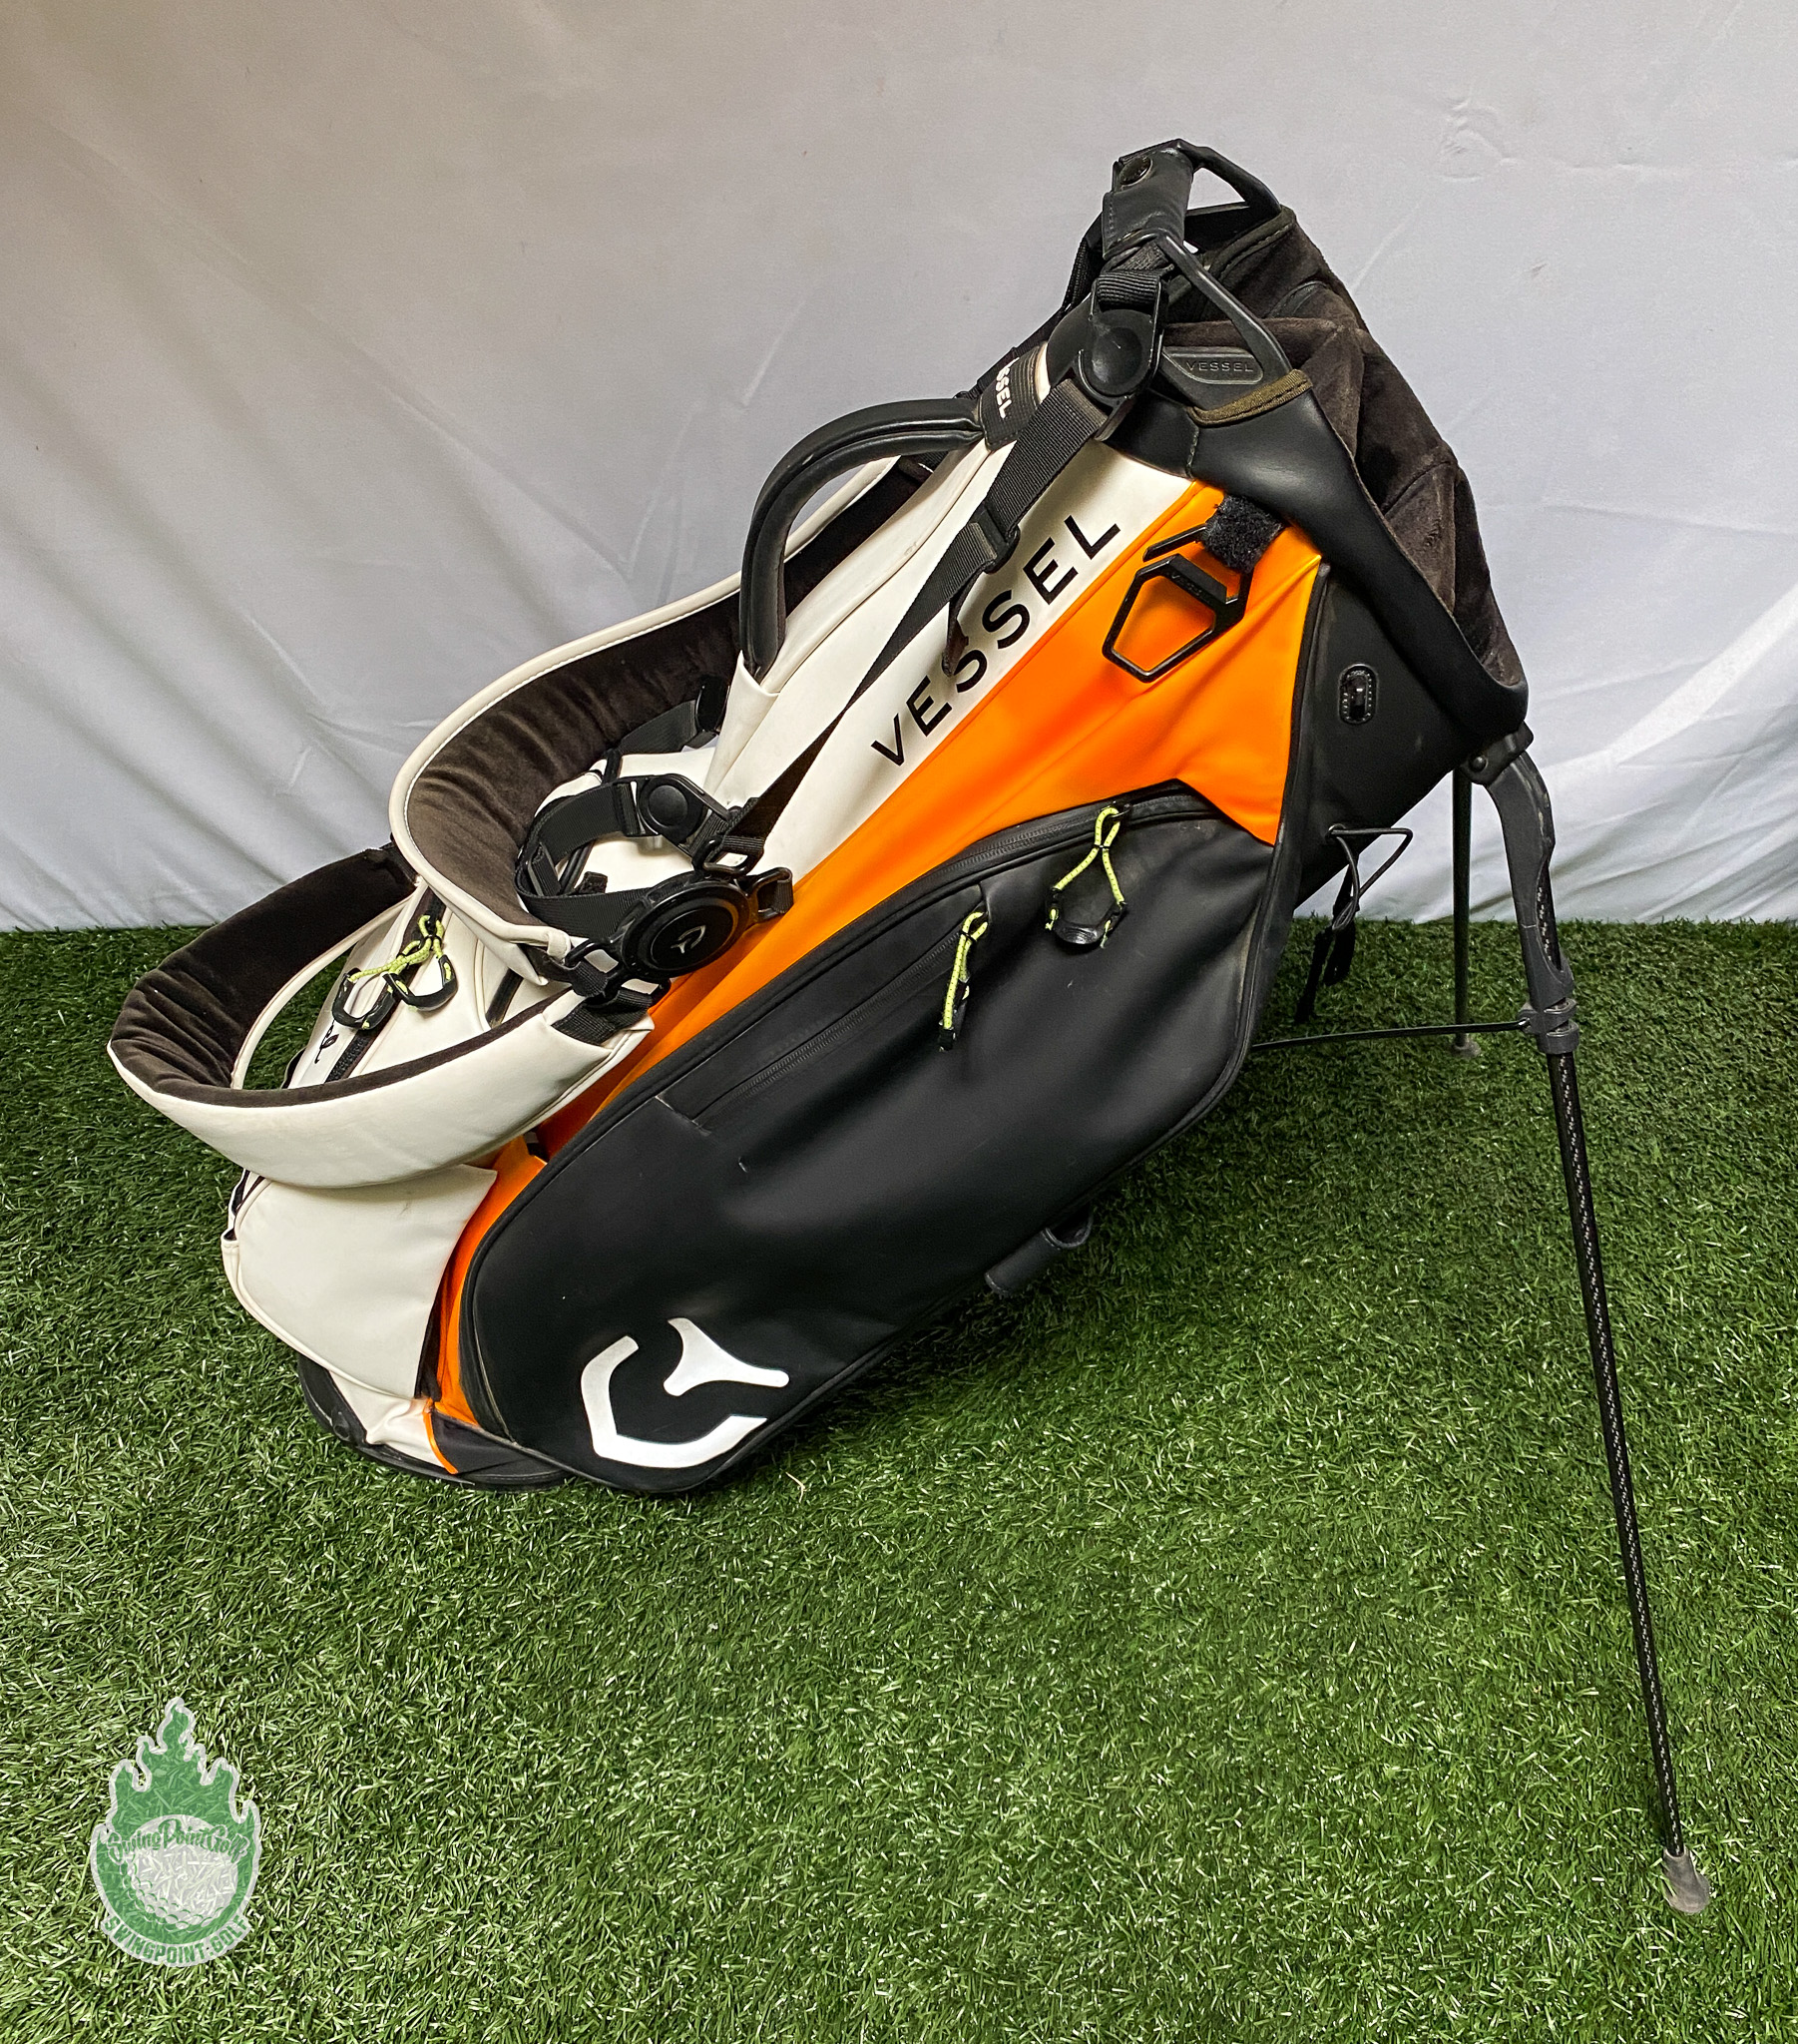 Vessel Bags golf product review – WiscoGolfAddict